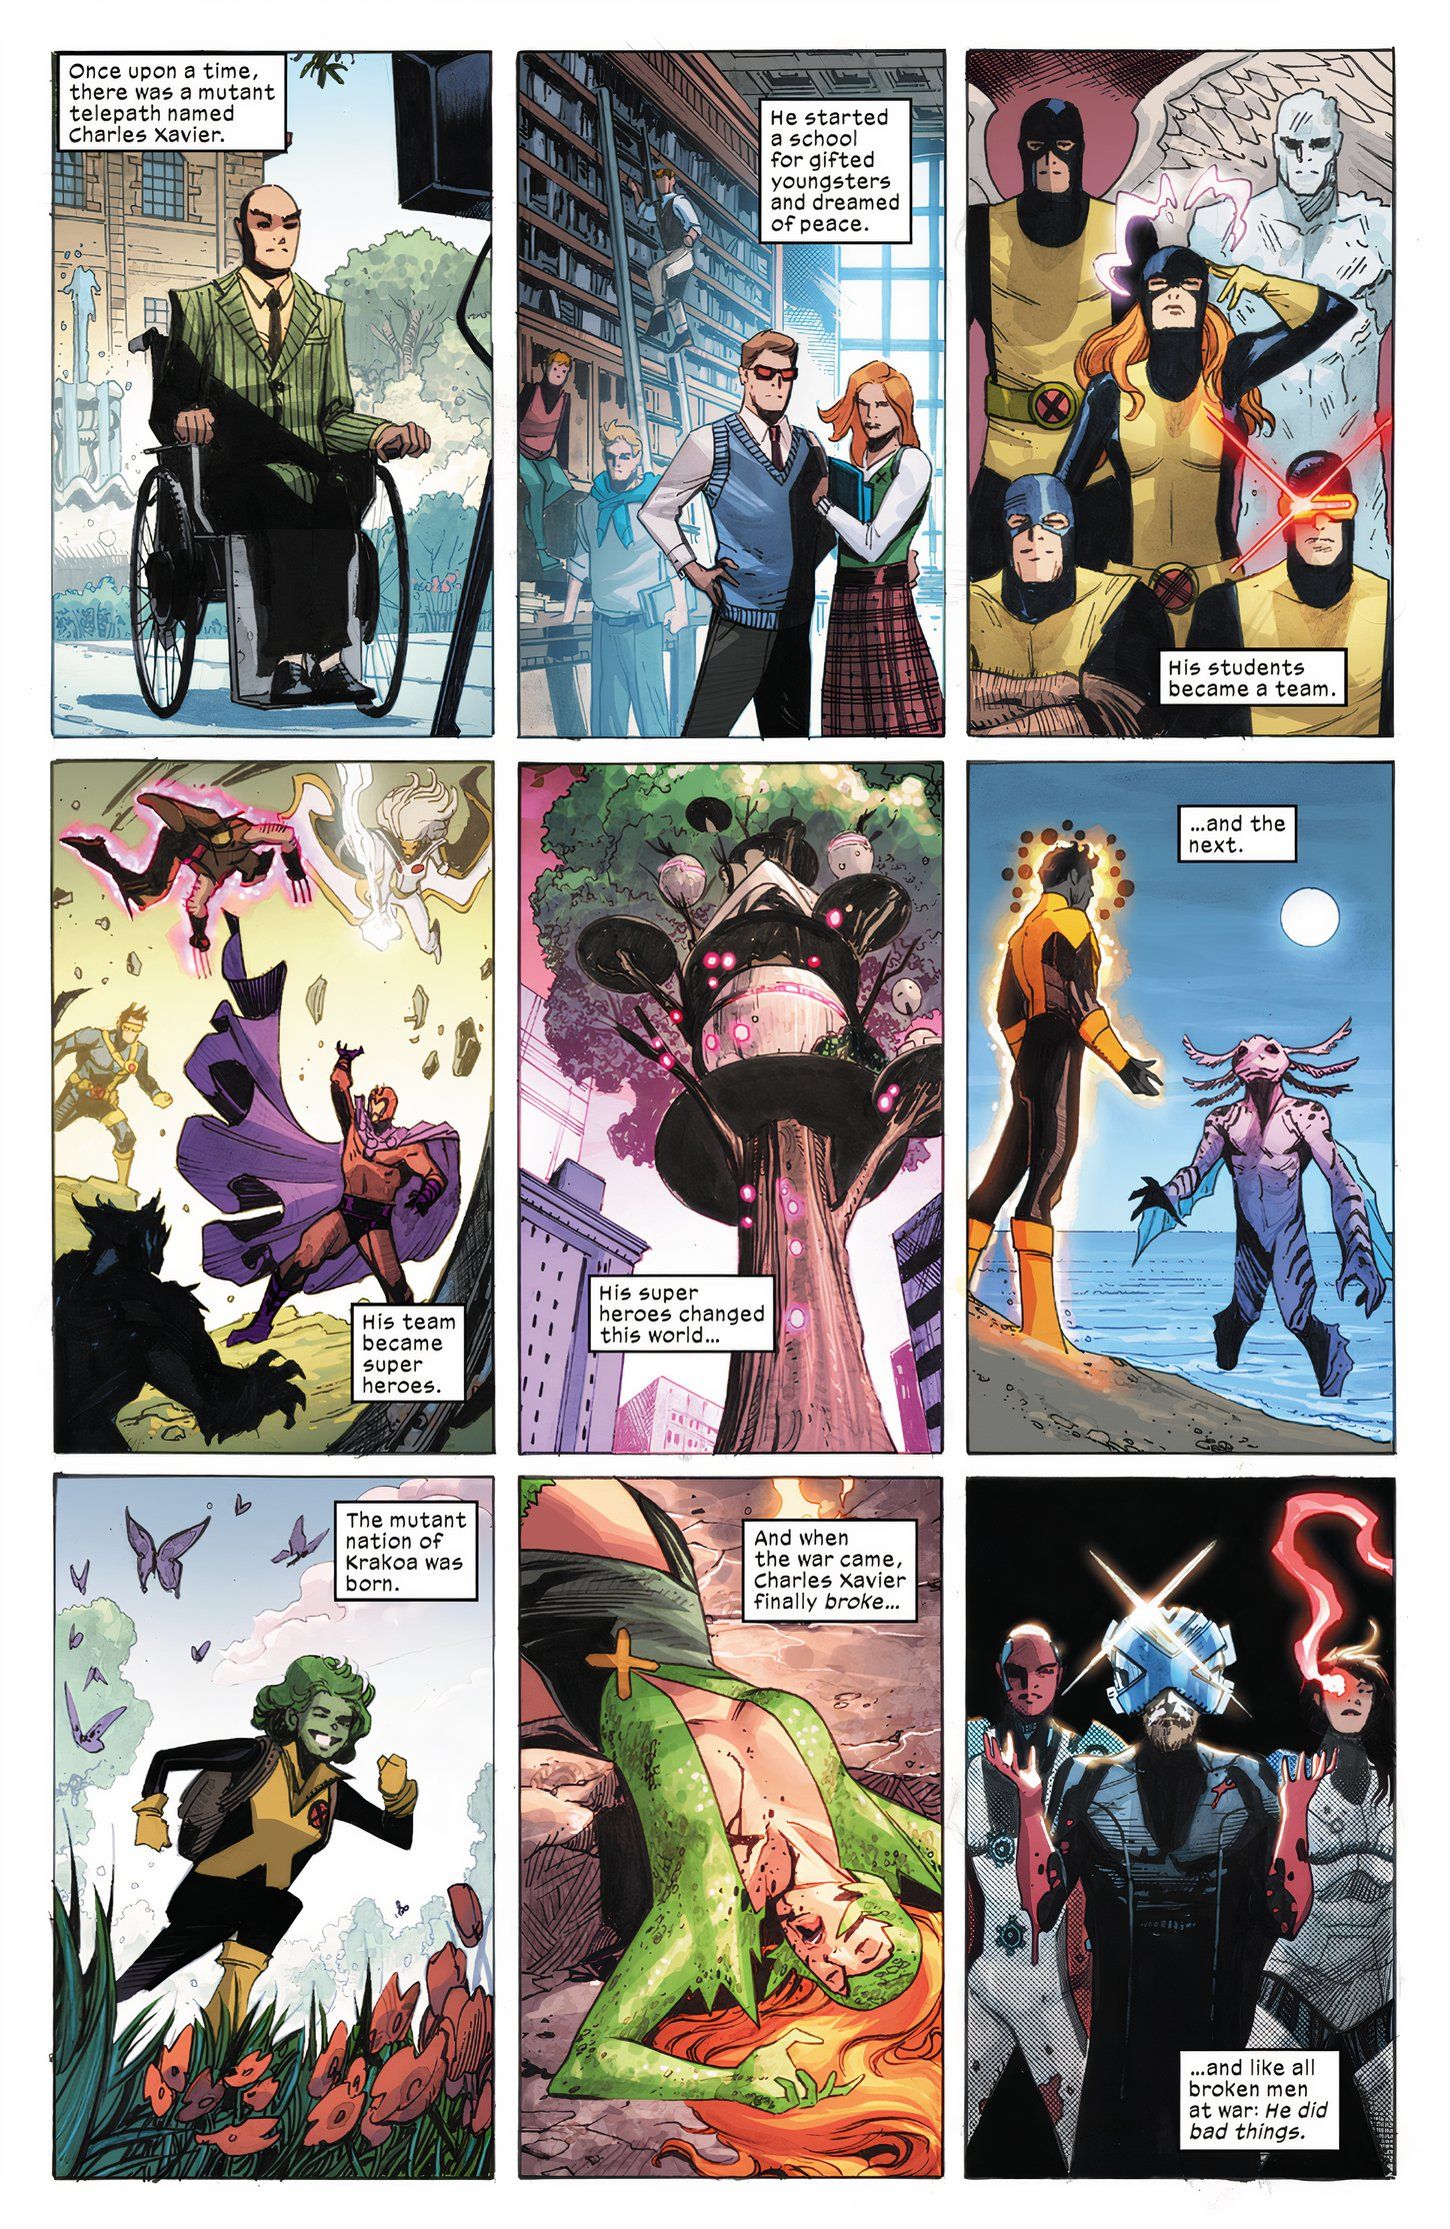 Panels depicting Charles Xavier and the early days of his original X-Men, Magneto, and other mutants. 